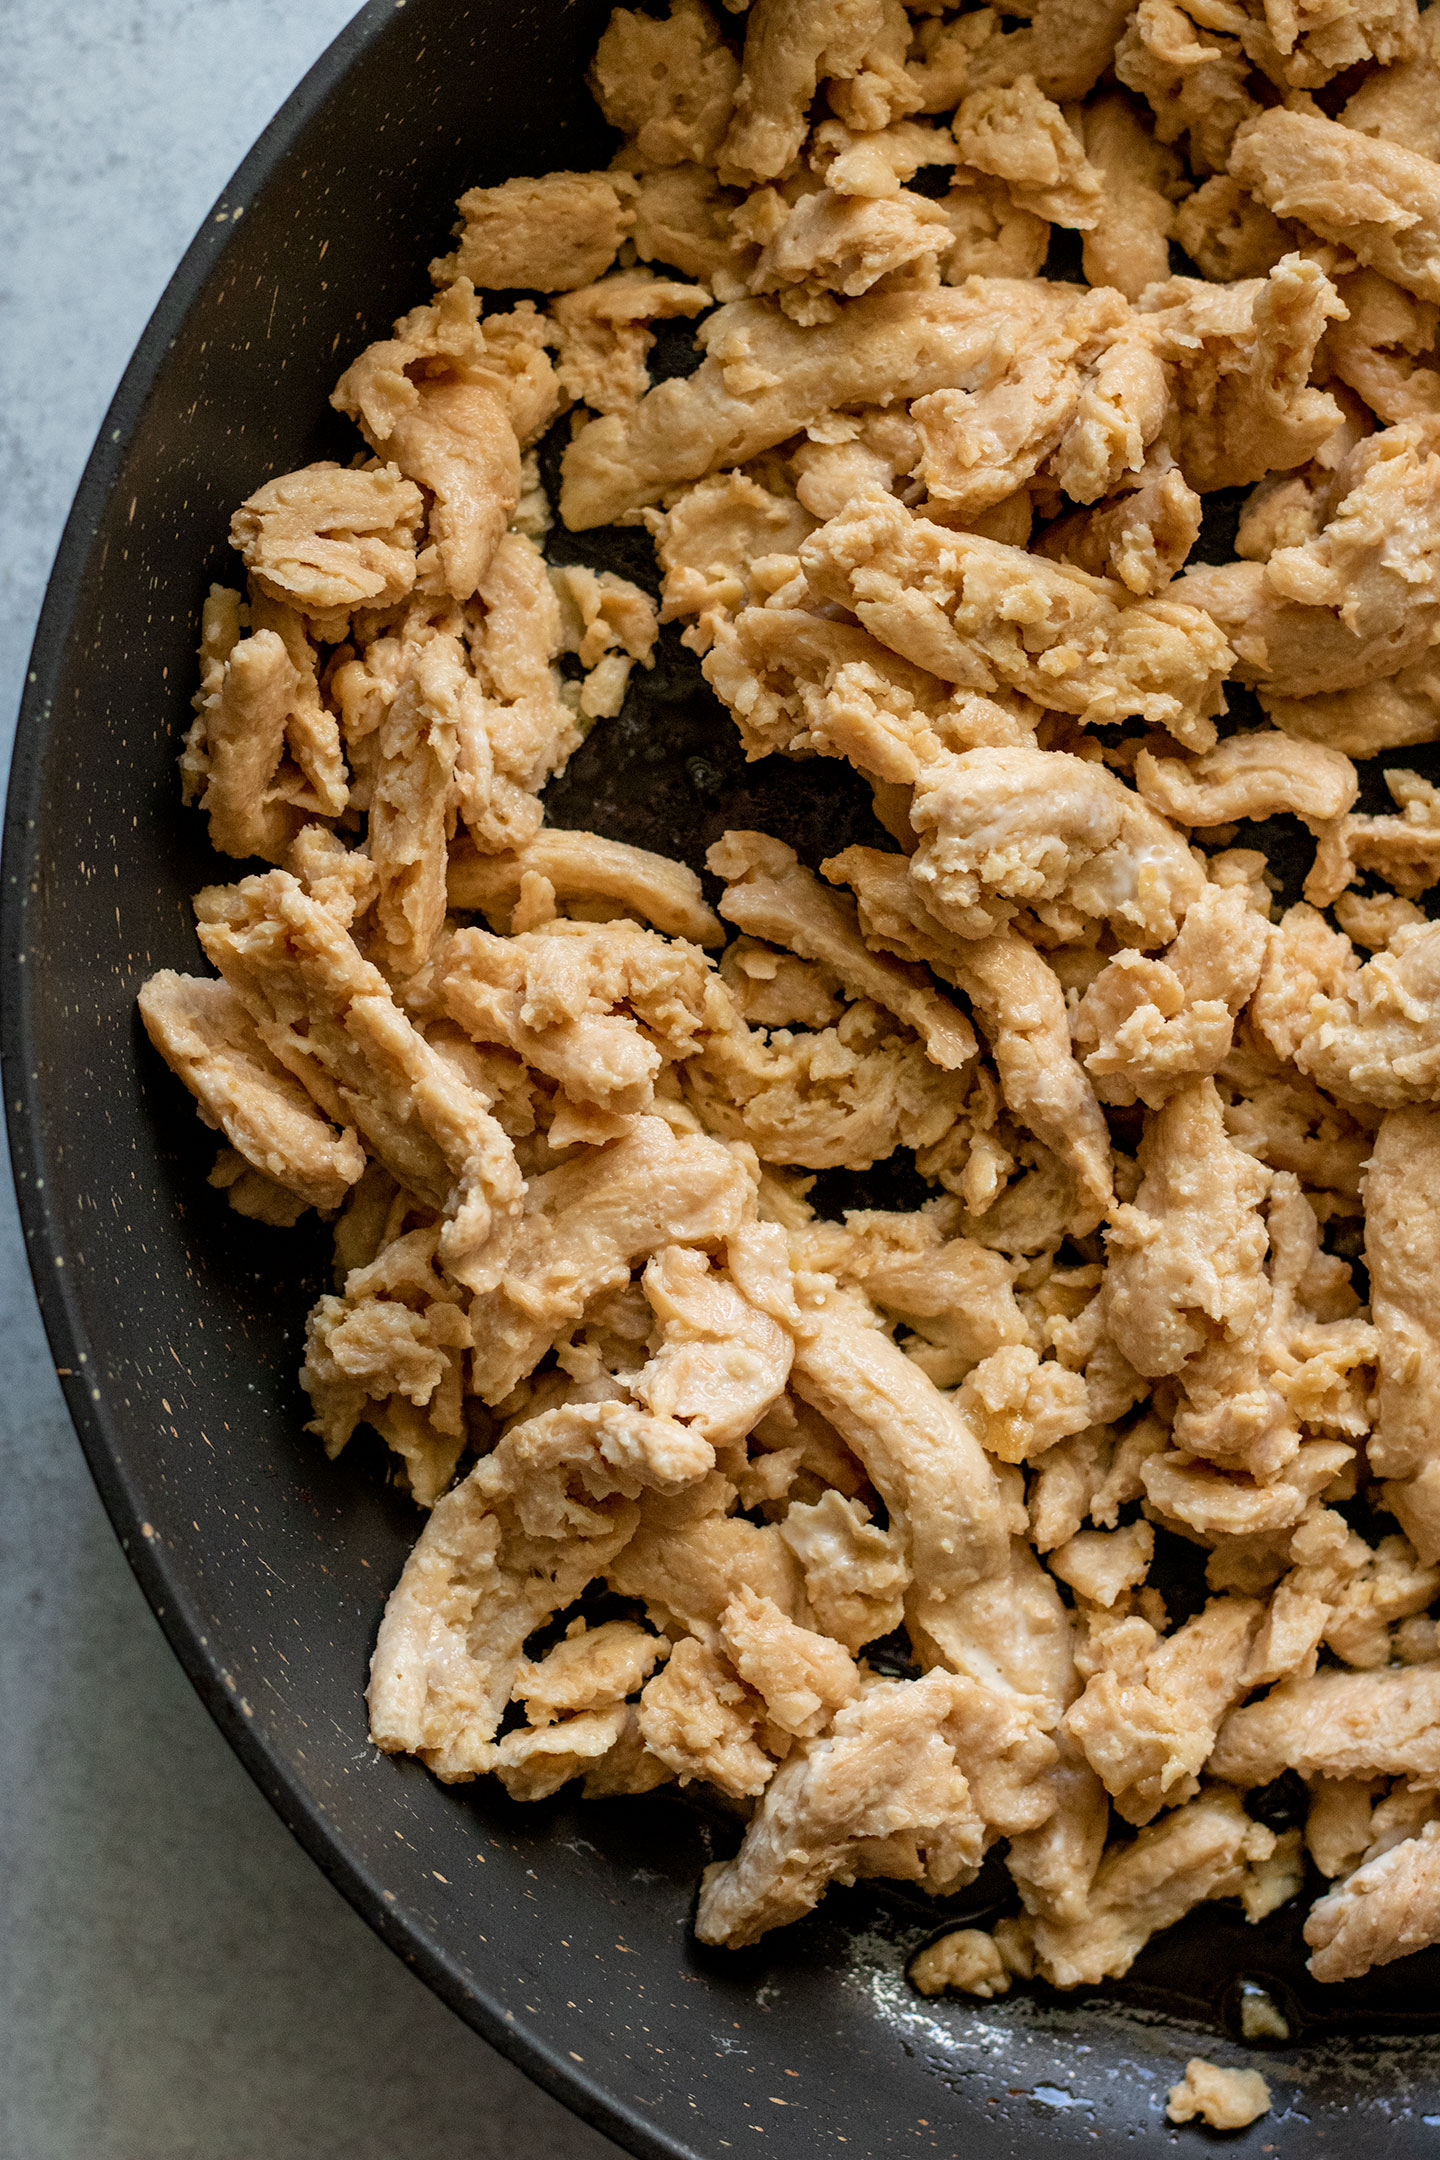 Adding the rehydrated soy curls to a pan with oil to crisp up.